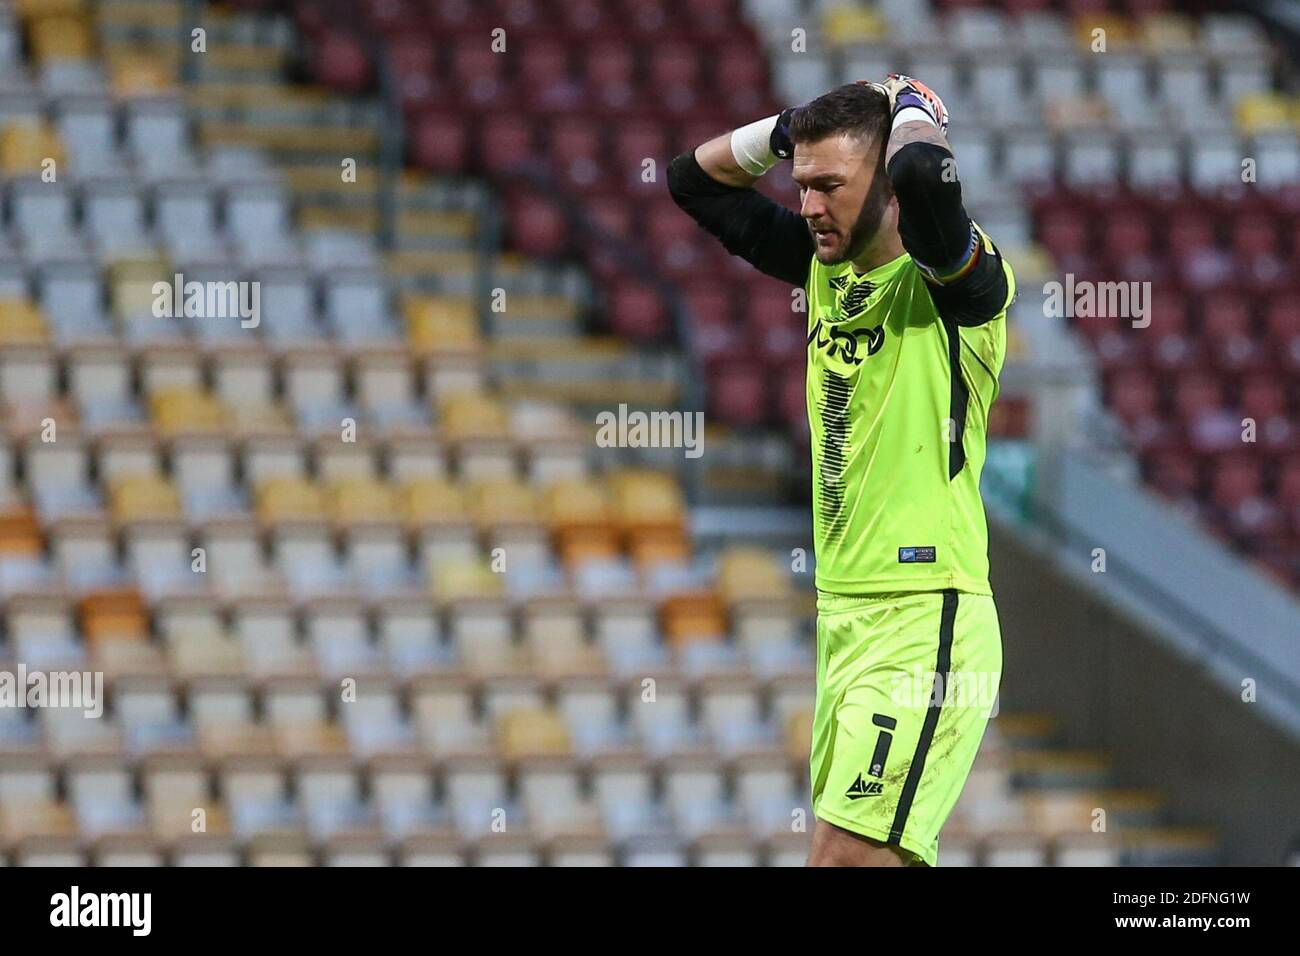 Richard ODonnell #1 of Bradford City reacts during the game Stock Photo